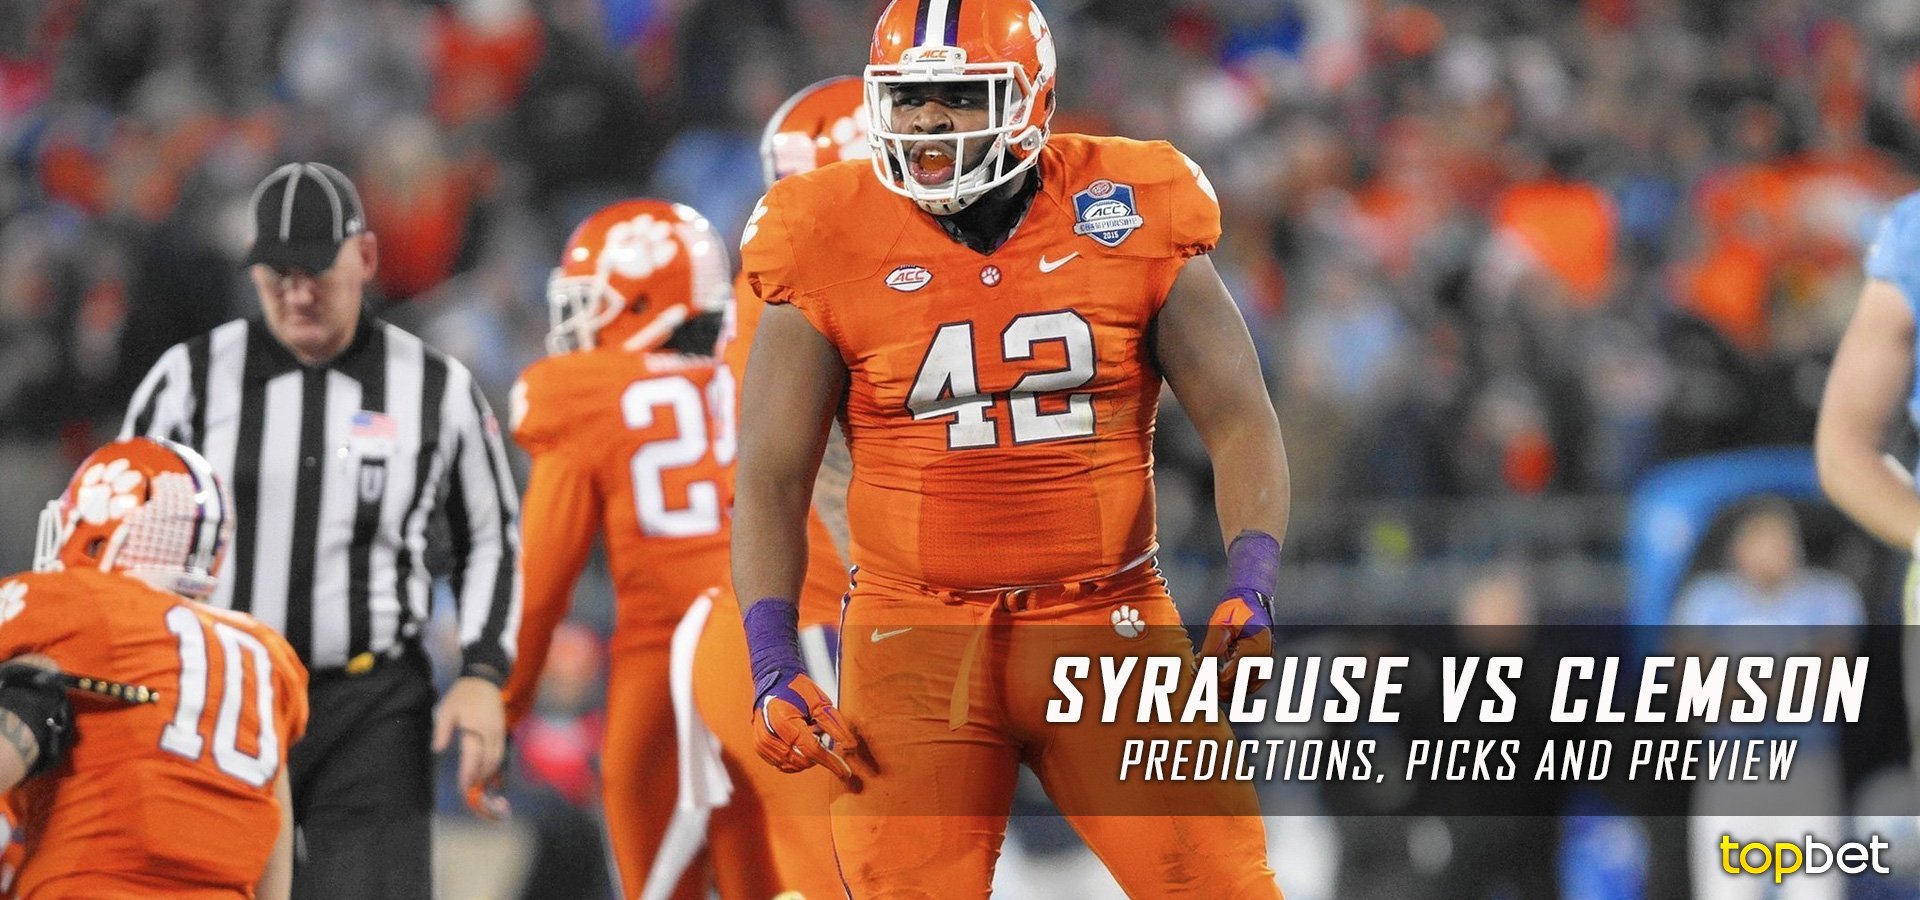 Syracuse vs Clemson Football Predictions, Picks and Preview